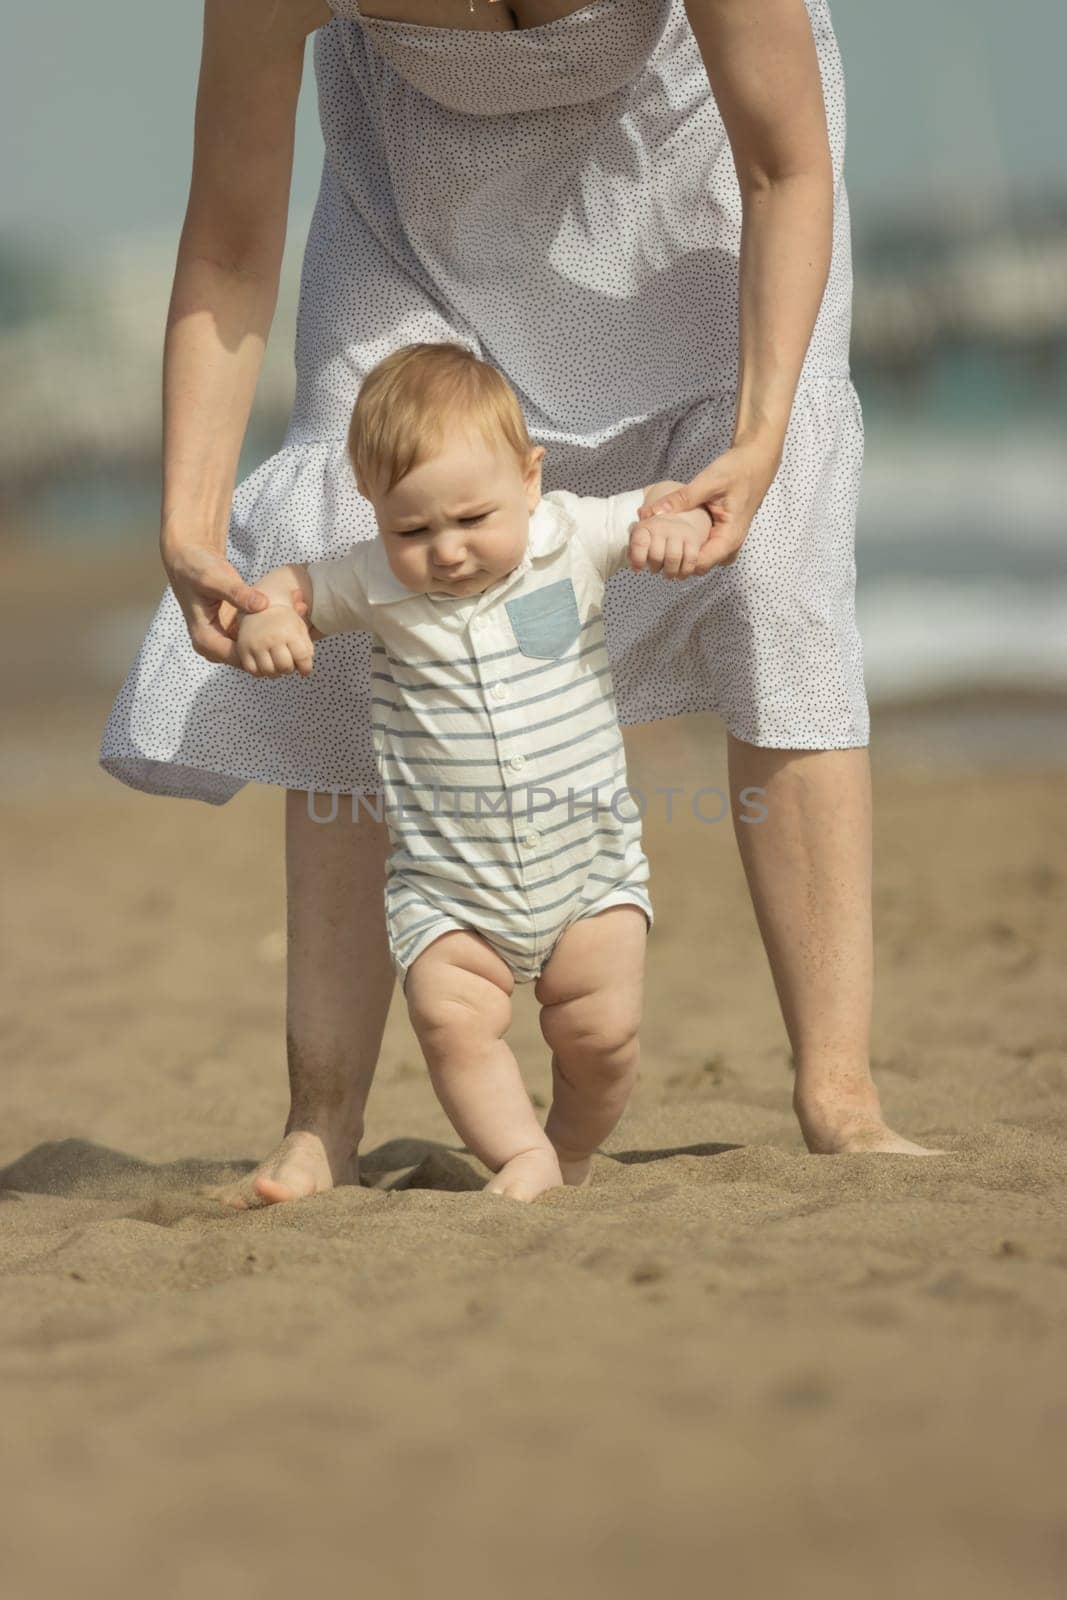 A little boy learns how to walk on the sand with support of his mother. Mid shot